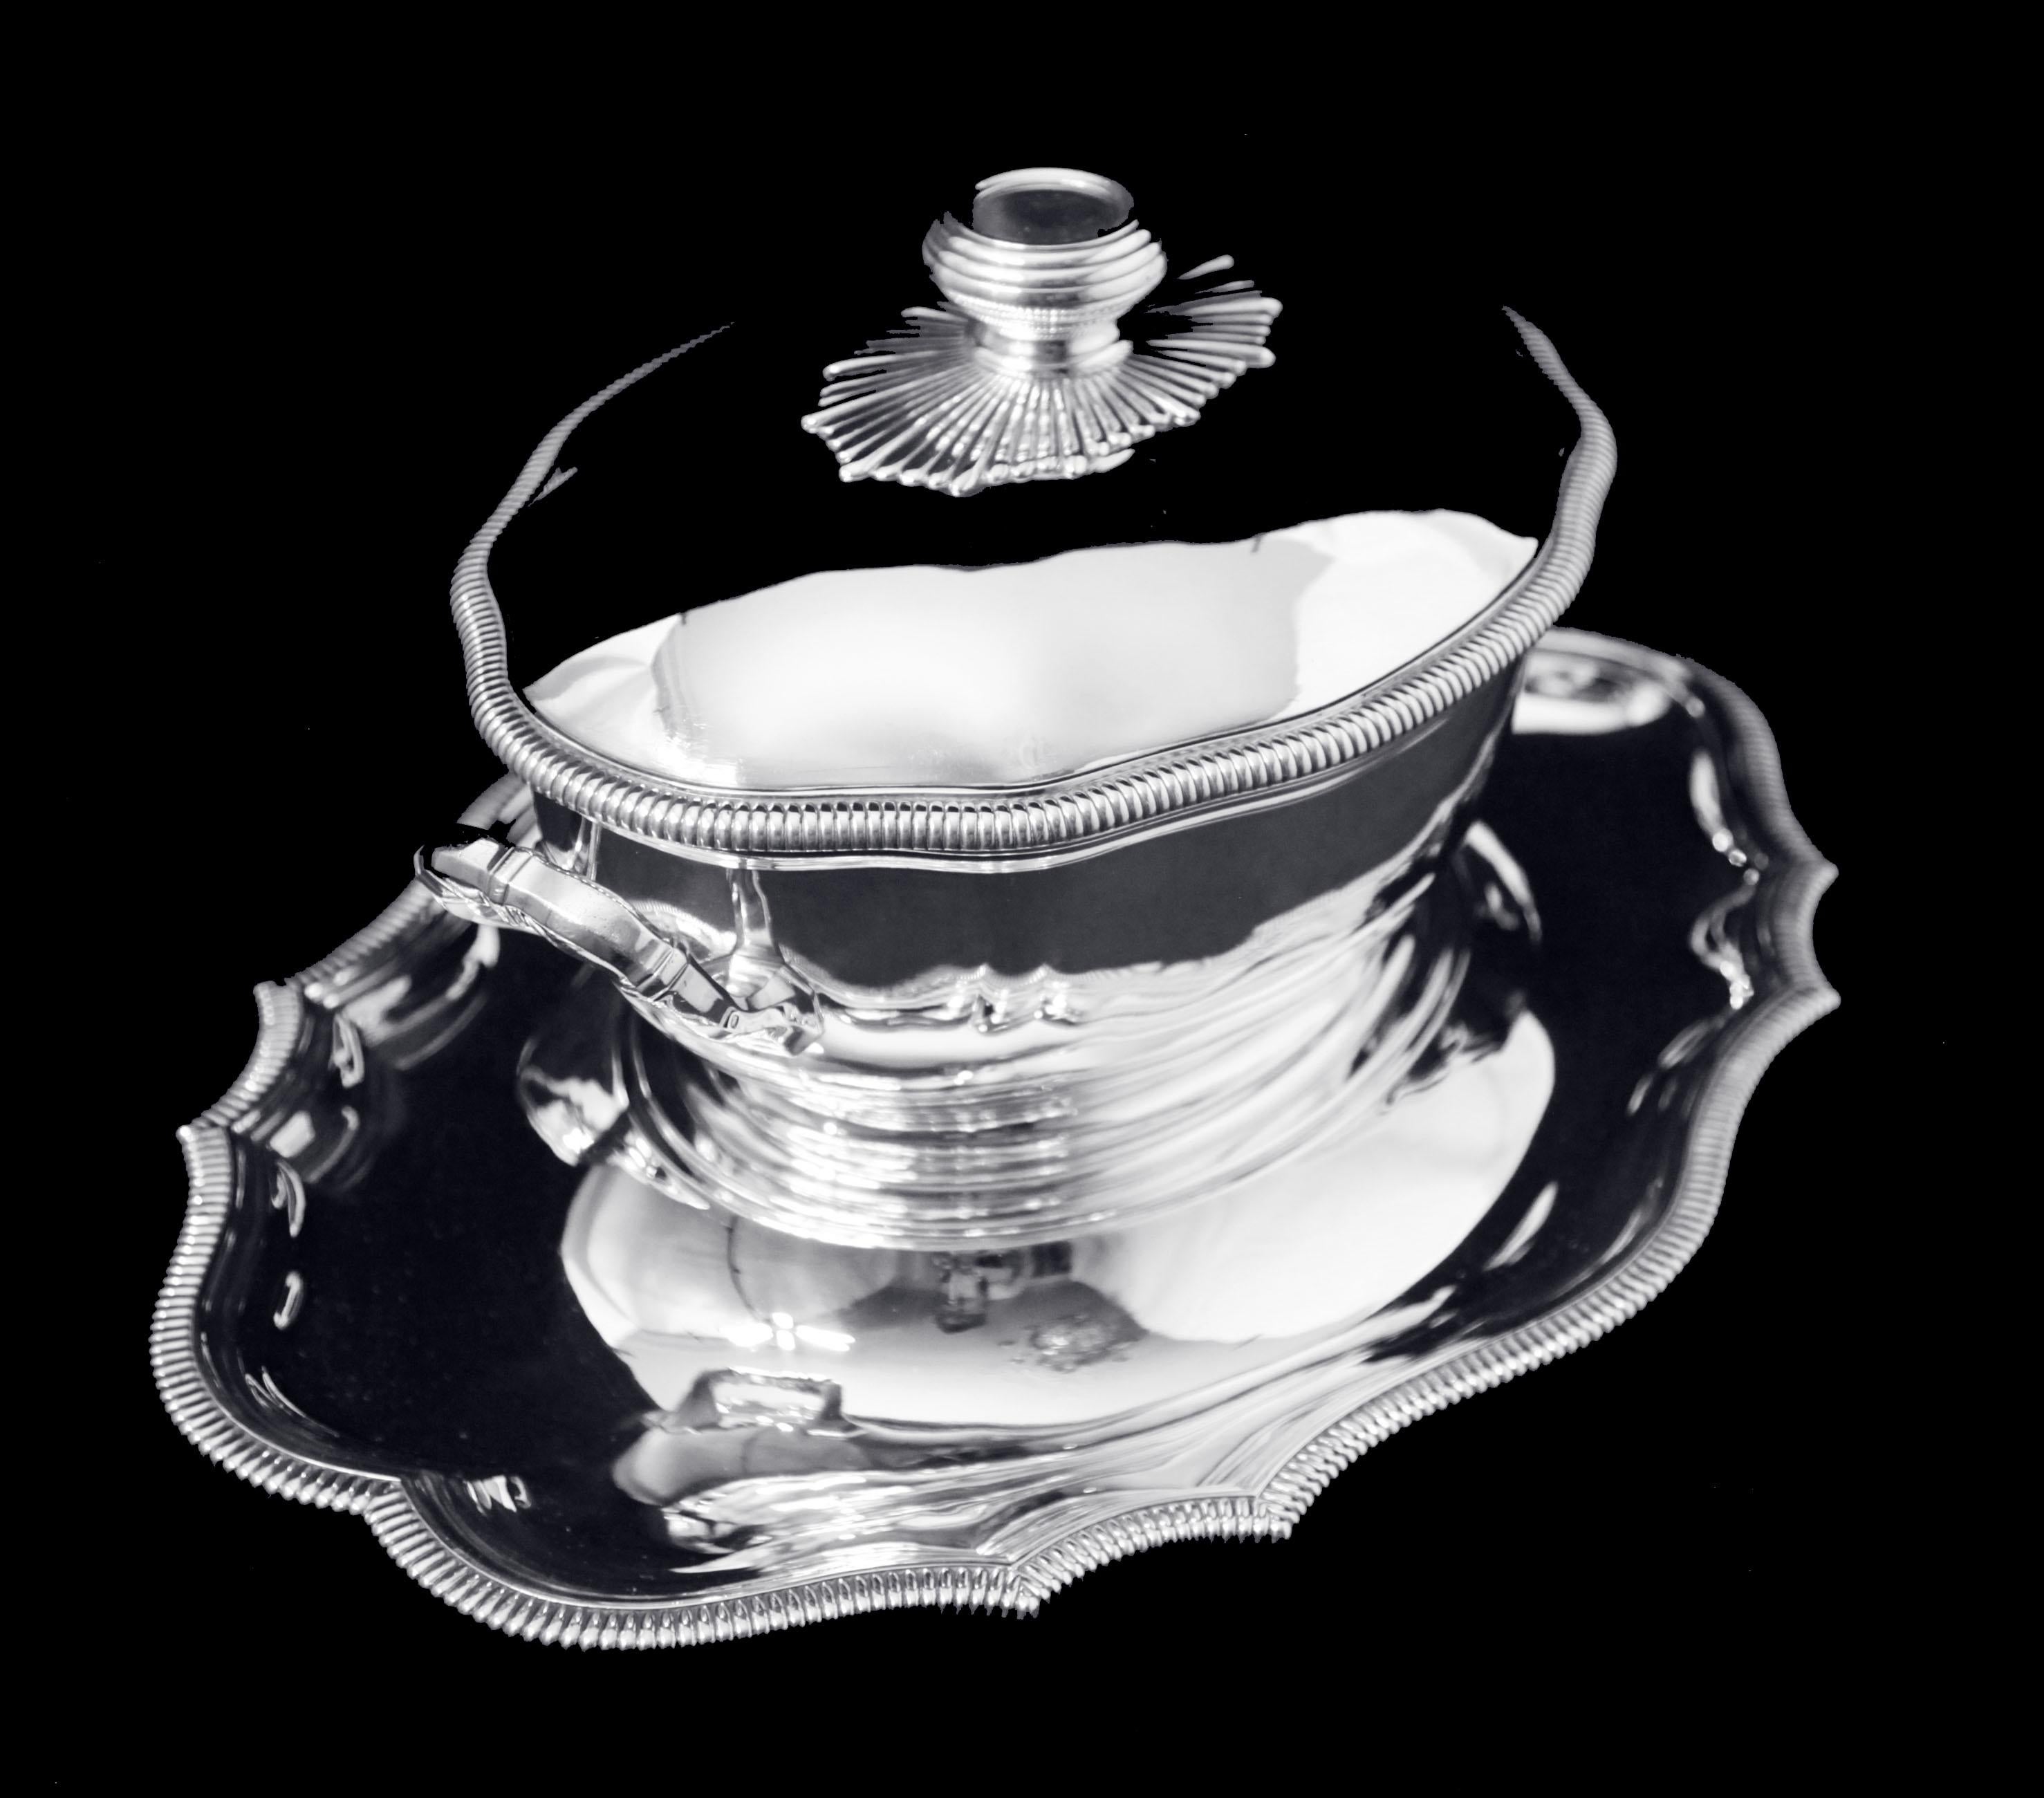 Direct from Paris, a Stunning Large 4pc. Covered Louis XVI, Antique 950 Sterling Silver Vegetable Server with Presentation Platter by the World's Premier French Silversmith - Emile Puiforcat. The history of French silversmithing is rich and diverse,